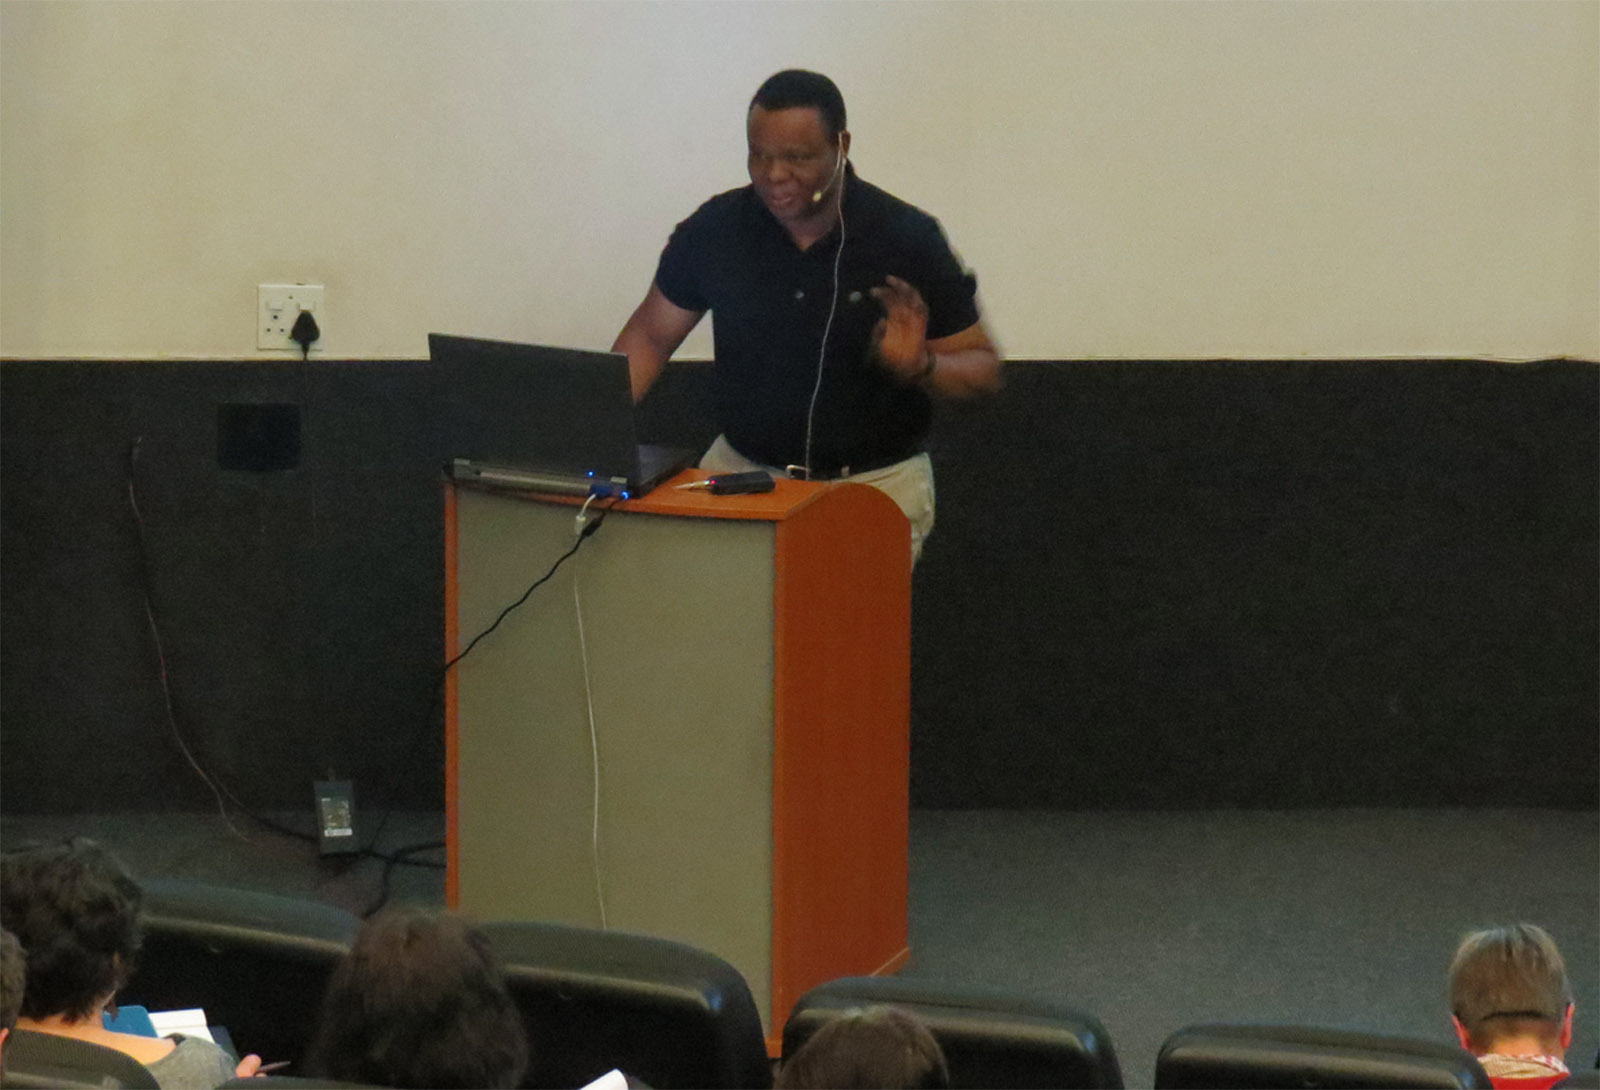 Click the image for a view of: Dr. Sikhumbuzo Mngadi speaking at the roundtable: South African book arts as a democratic force. Sunday 26 March